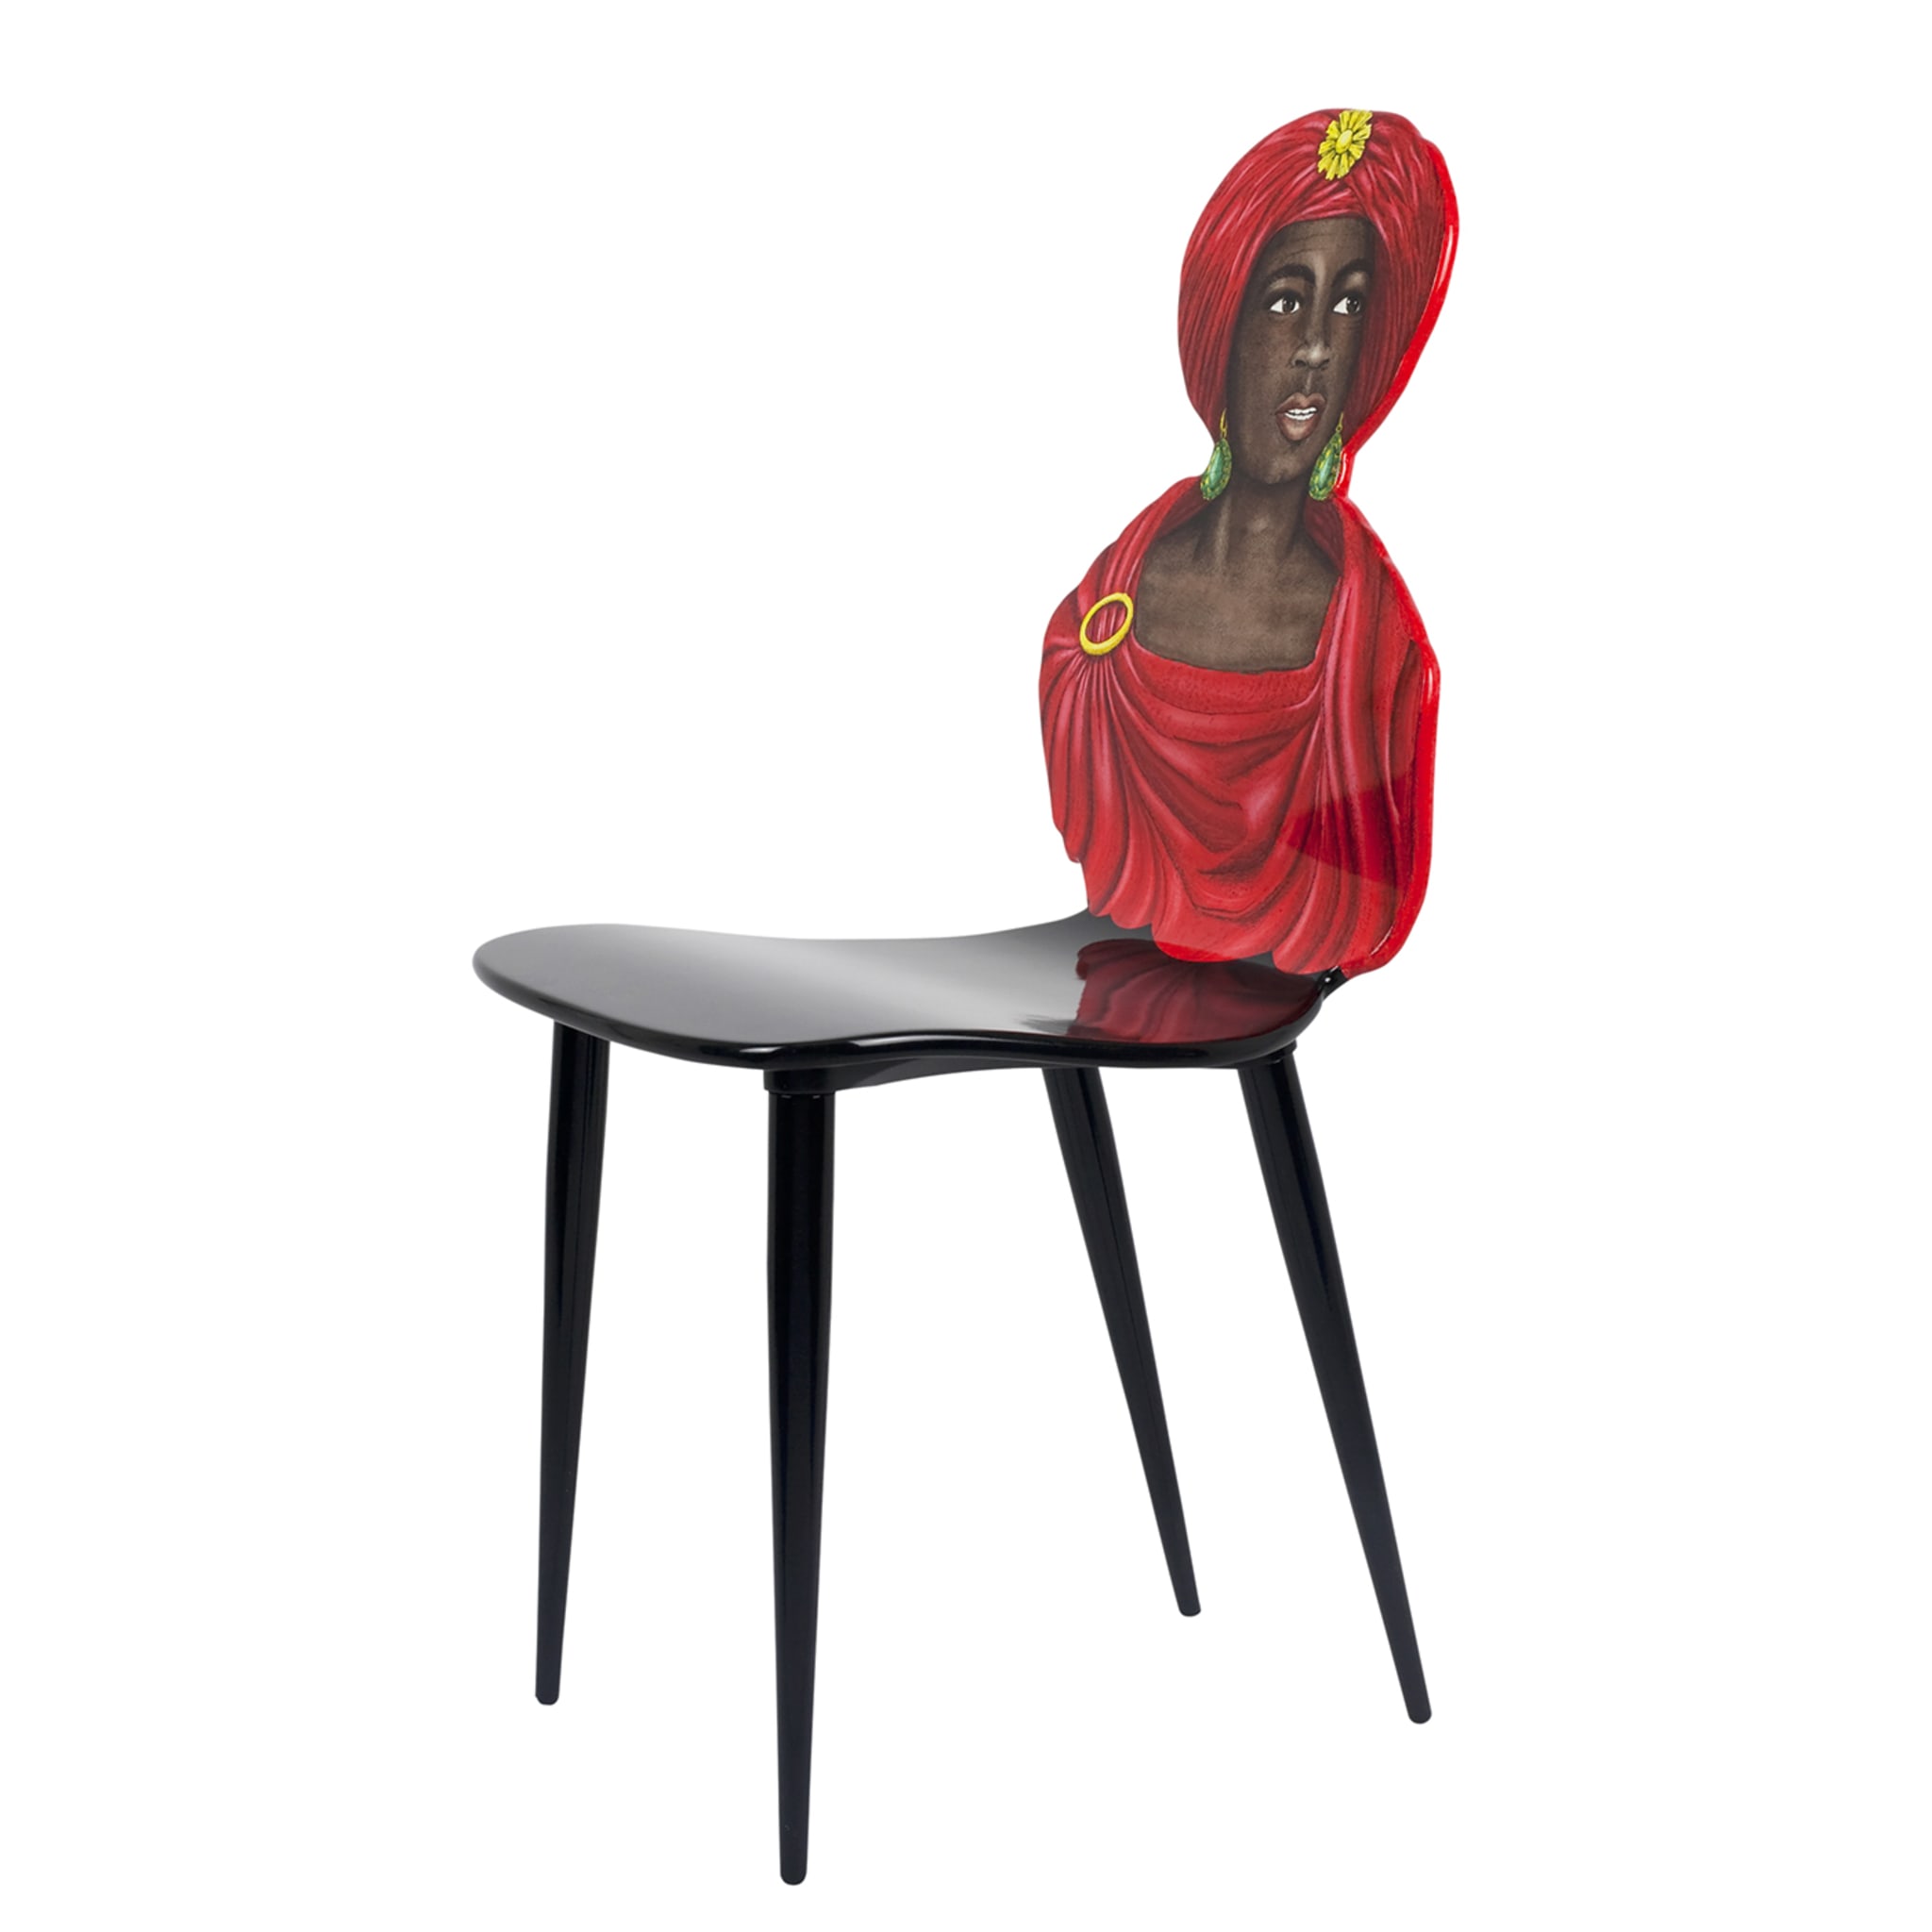 Moro Red Chair - Alternative view 2